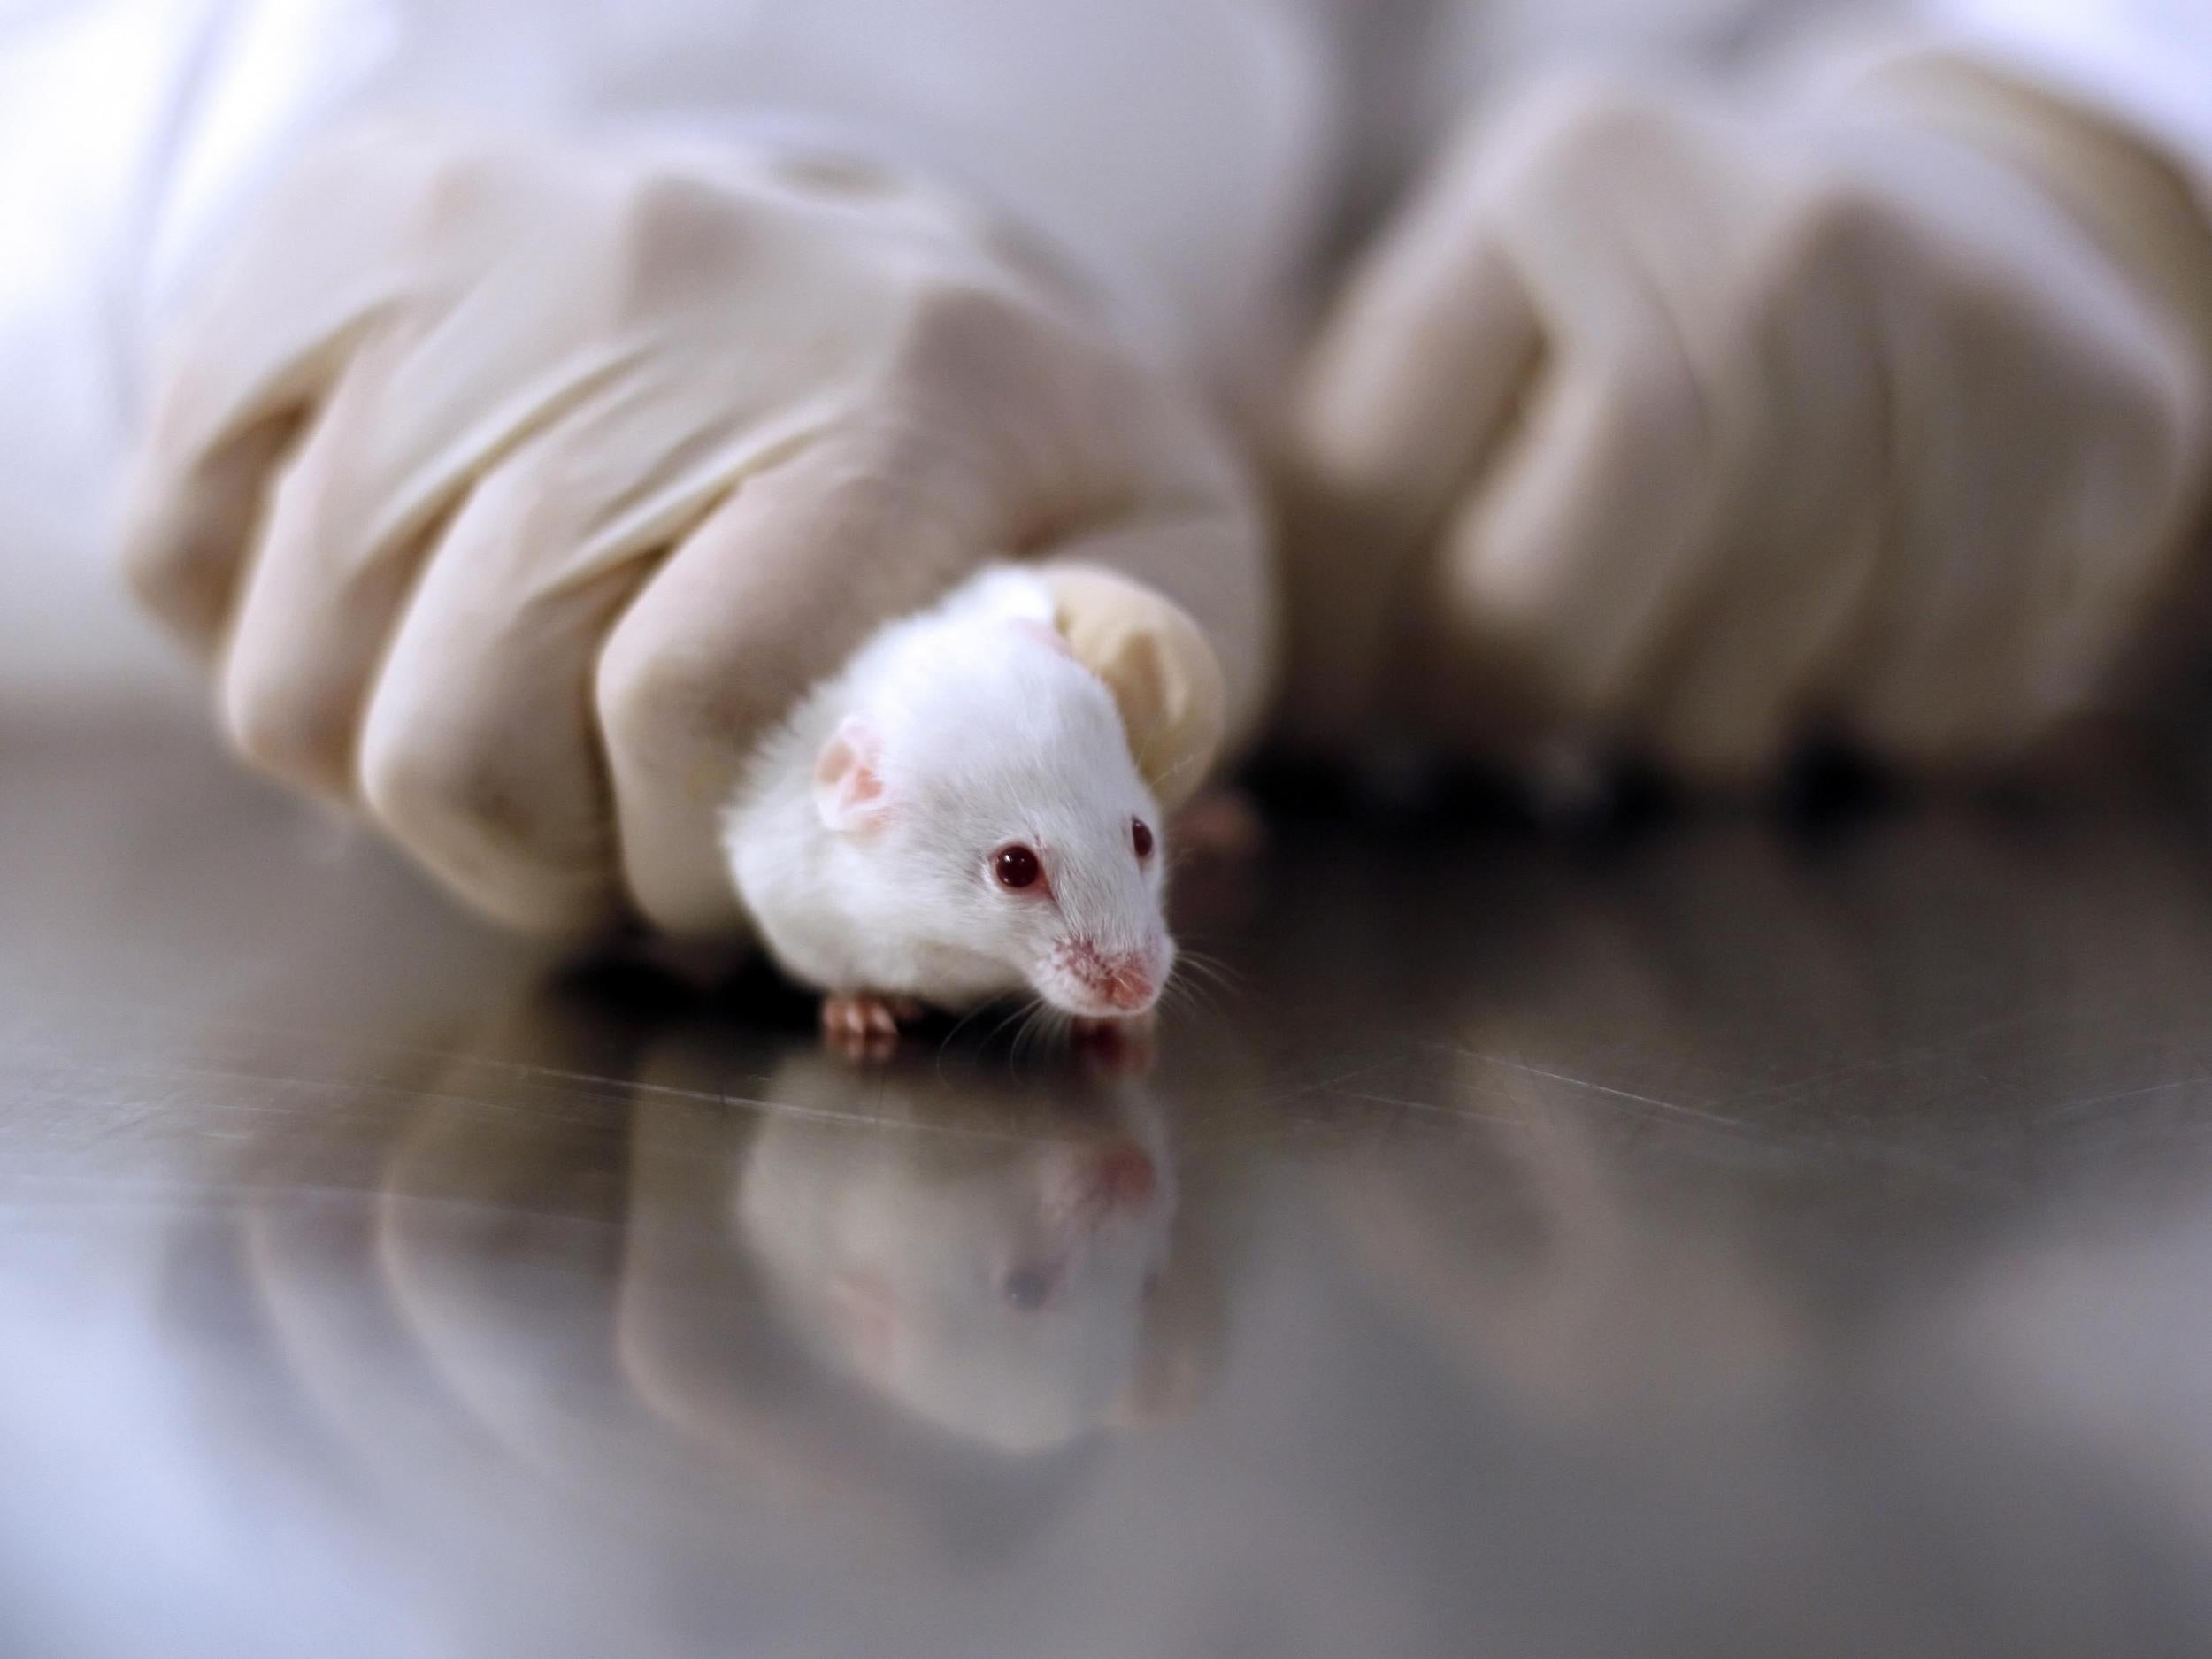 Animal rights groups and chemical companies alike have warned of more animal testing after Brexit